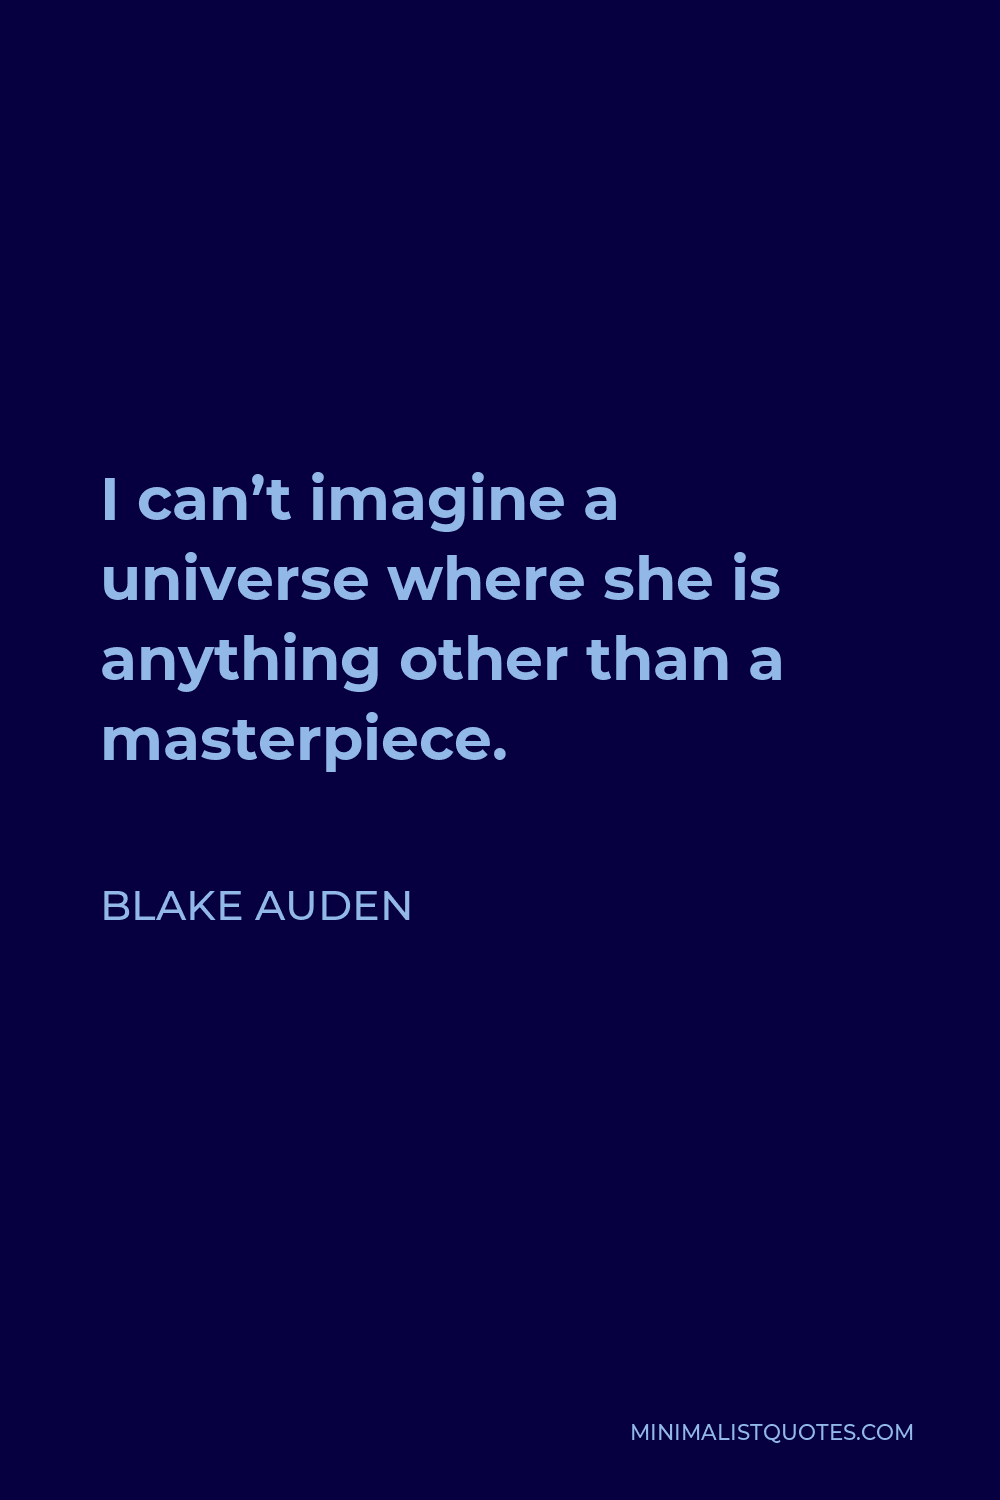 Blake Auden Quote - I can’t imagine a universe where she is anything other than a masterpiece.